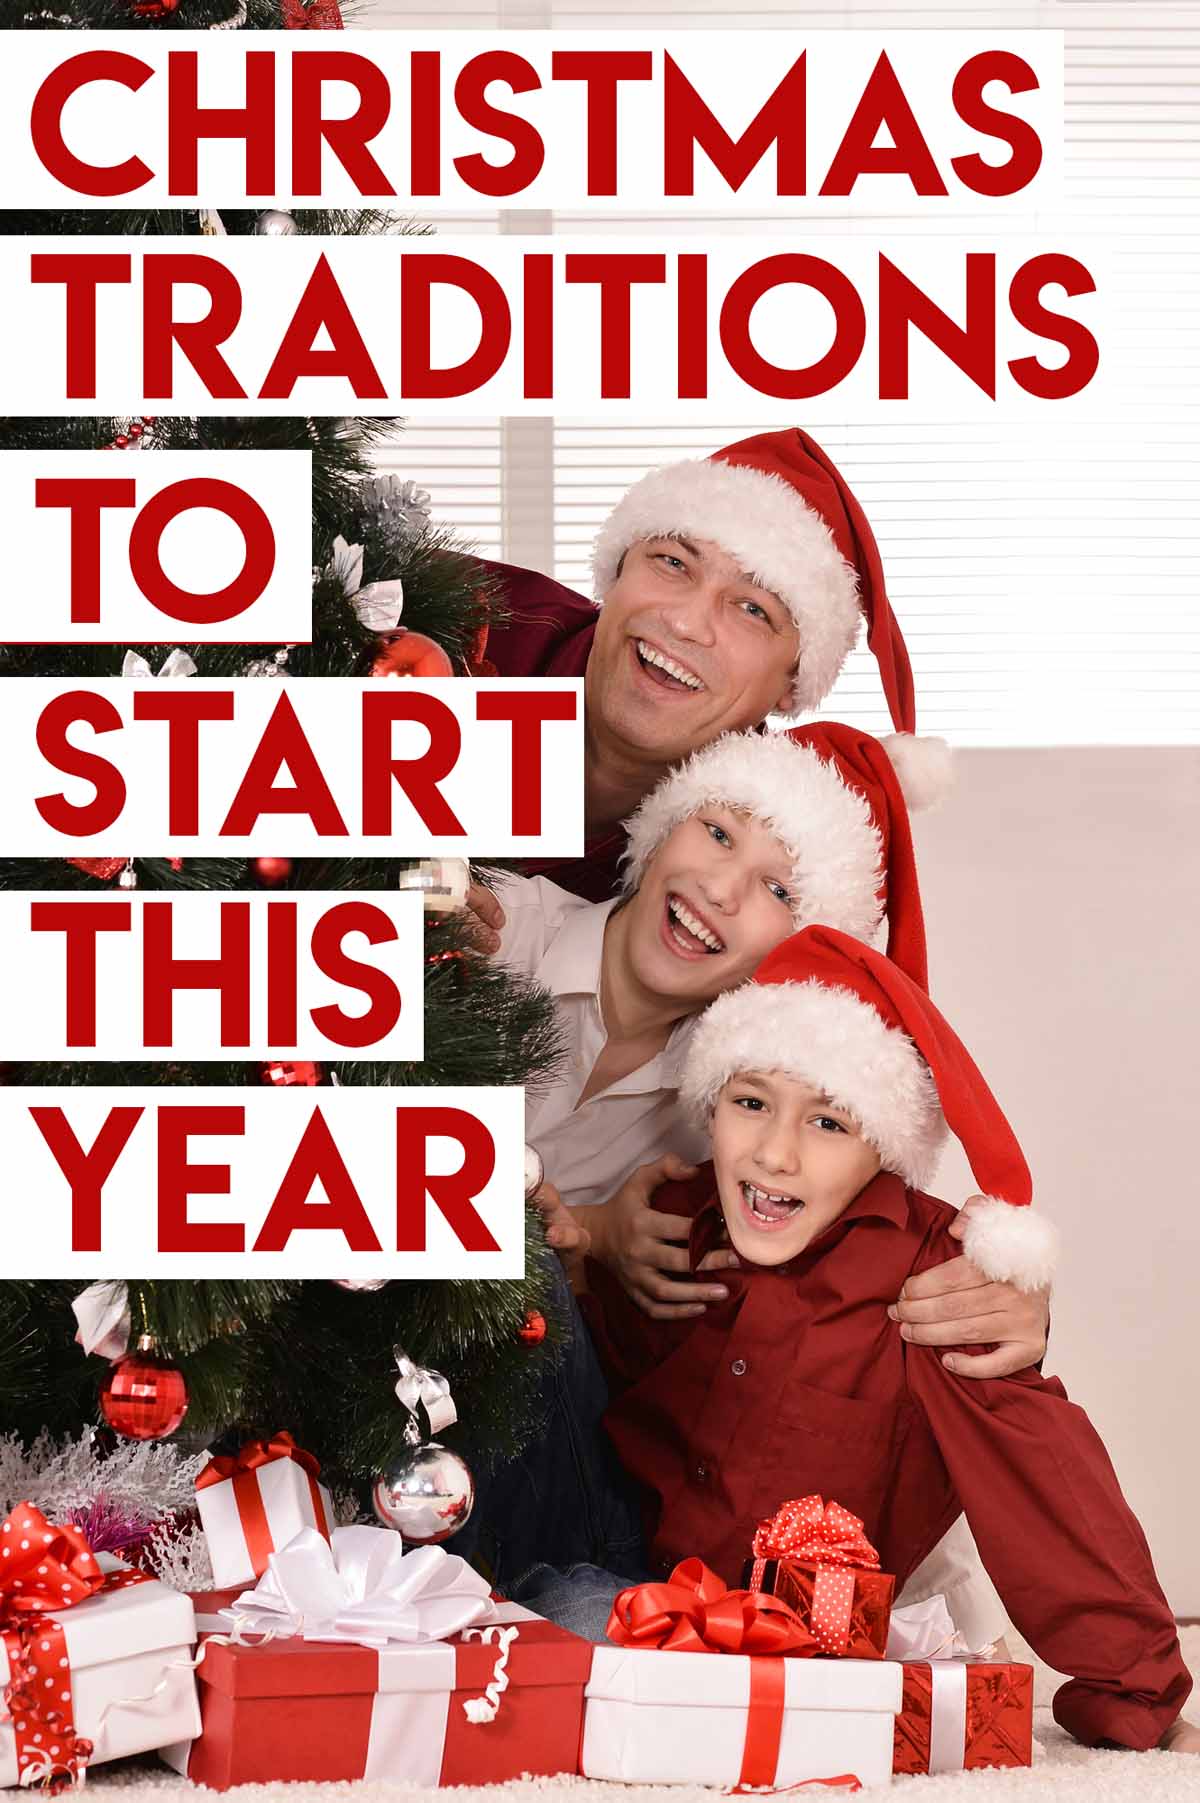 How to Start Your Own Family Christmas Traditions + 14 Christmas Tradition Ideas via @lara_neves